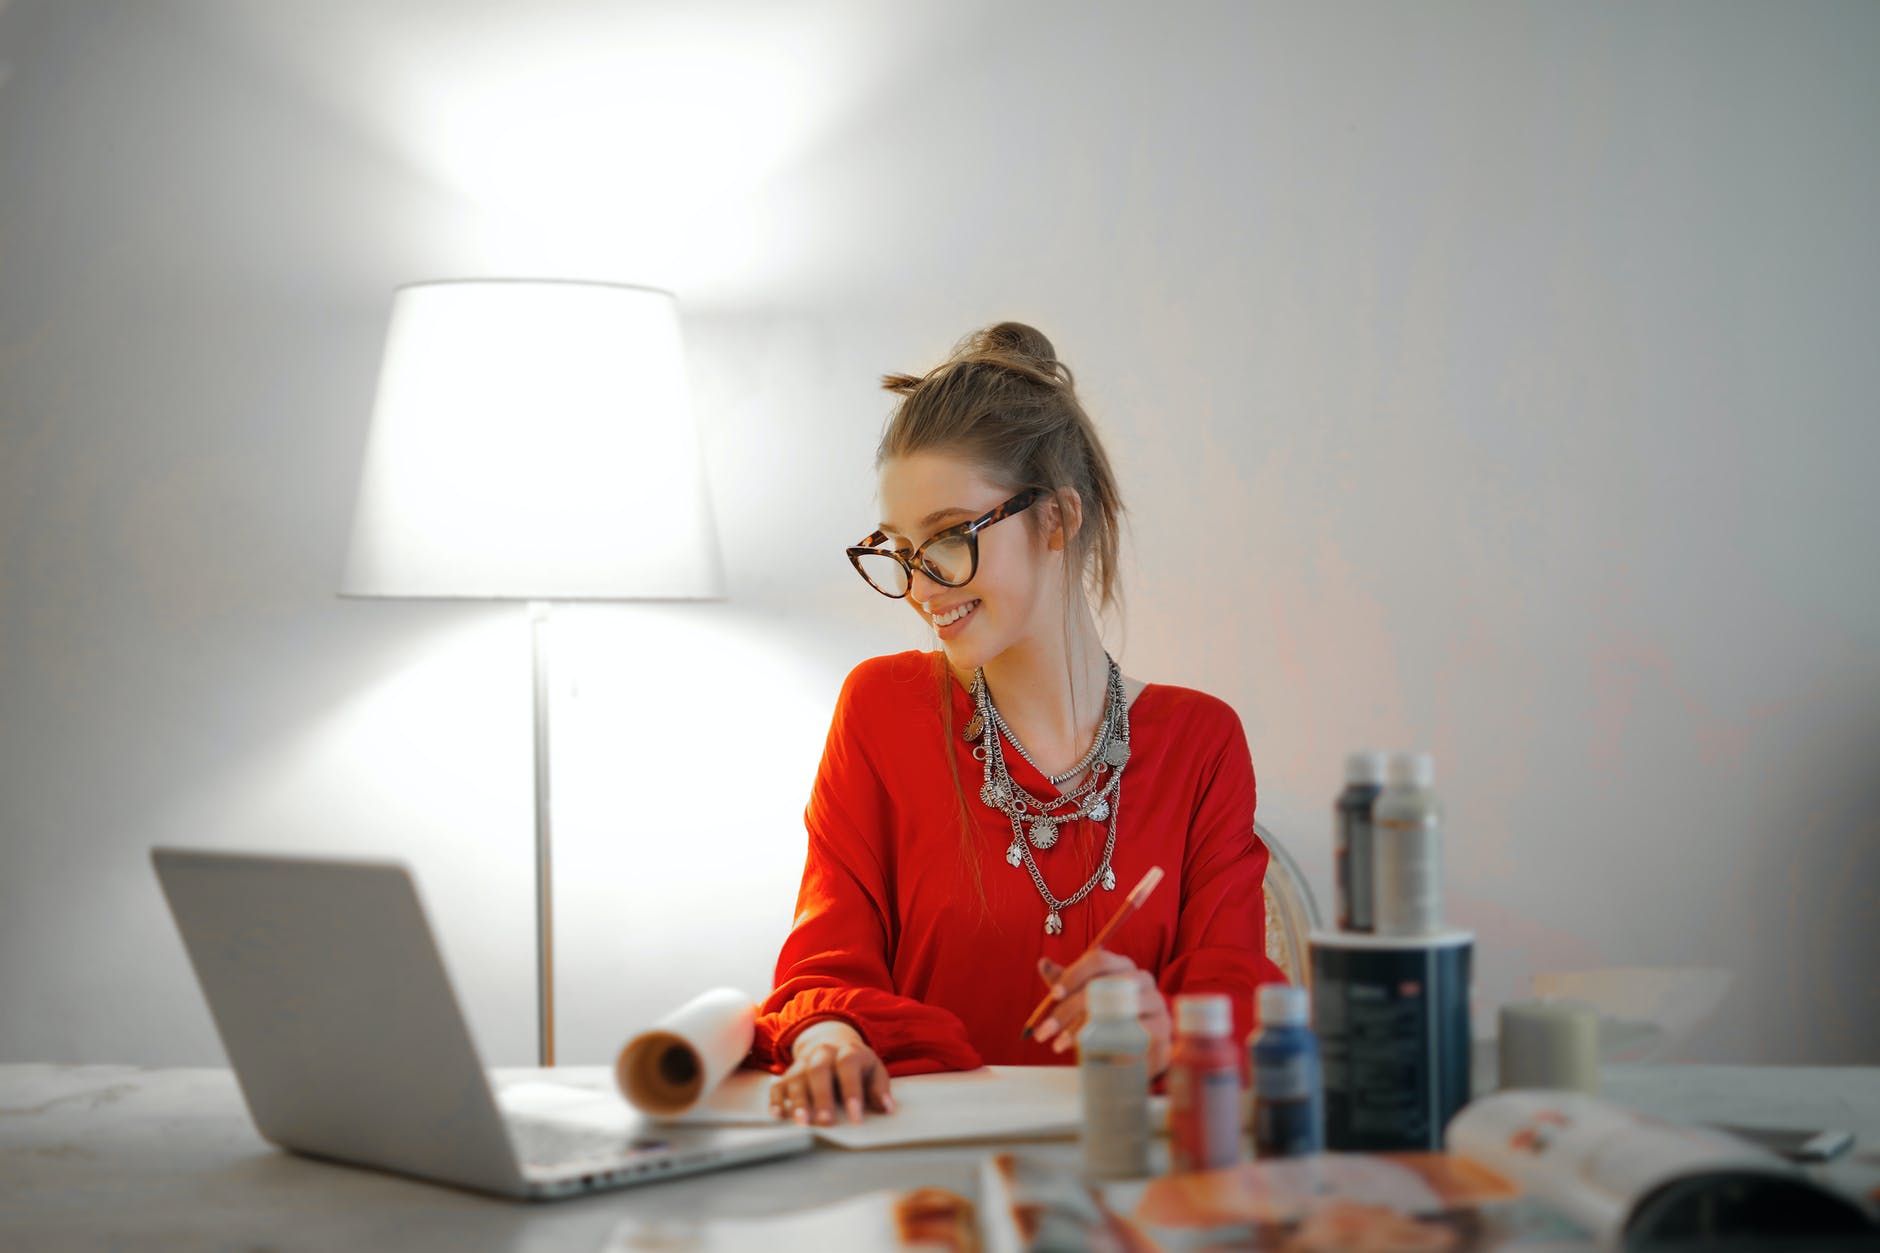 3 Easy Freelance Jobs to Try for Extra Income